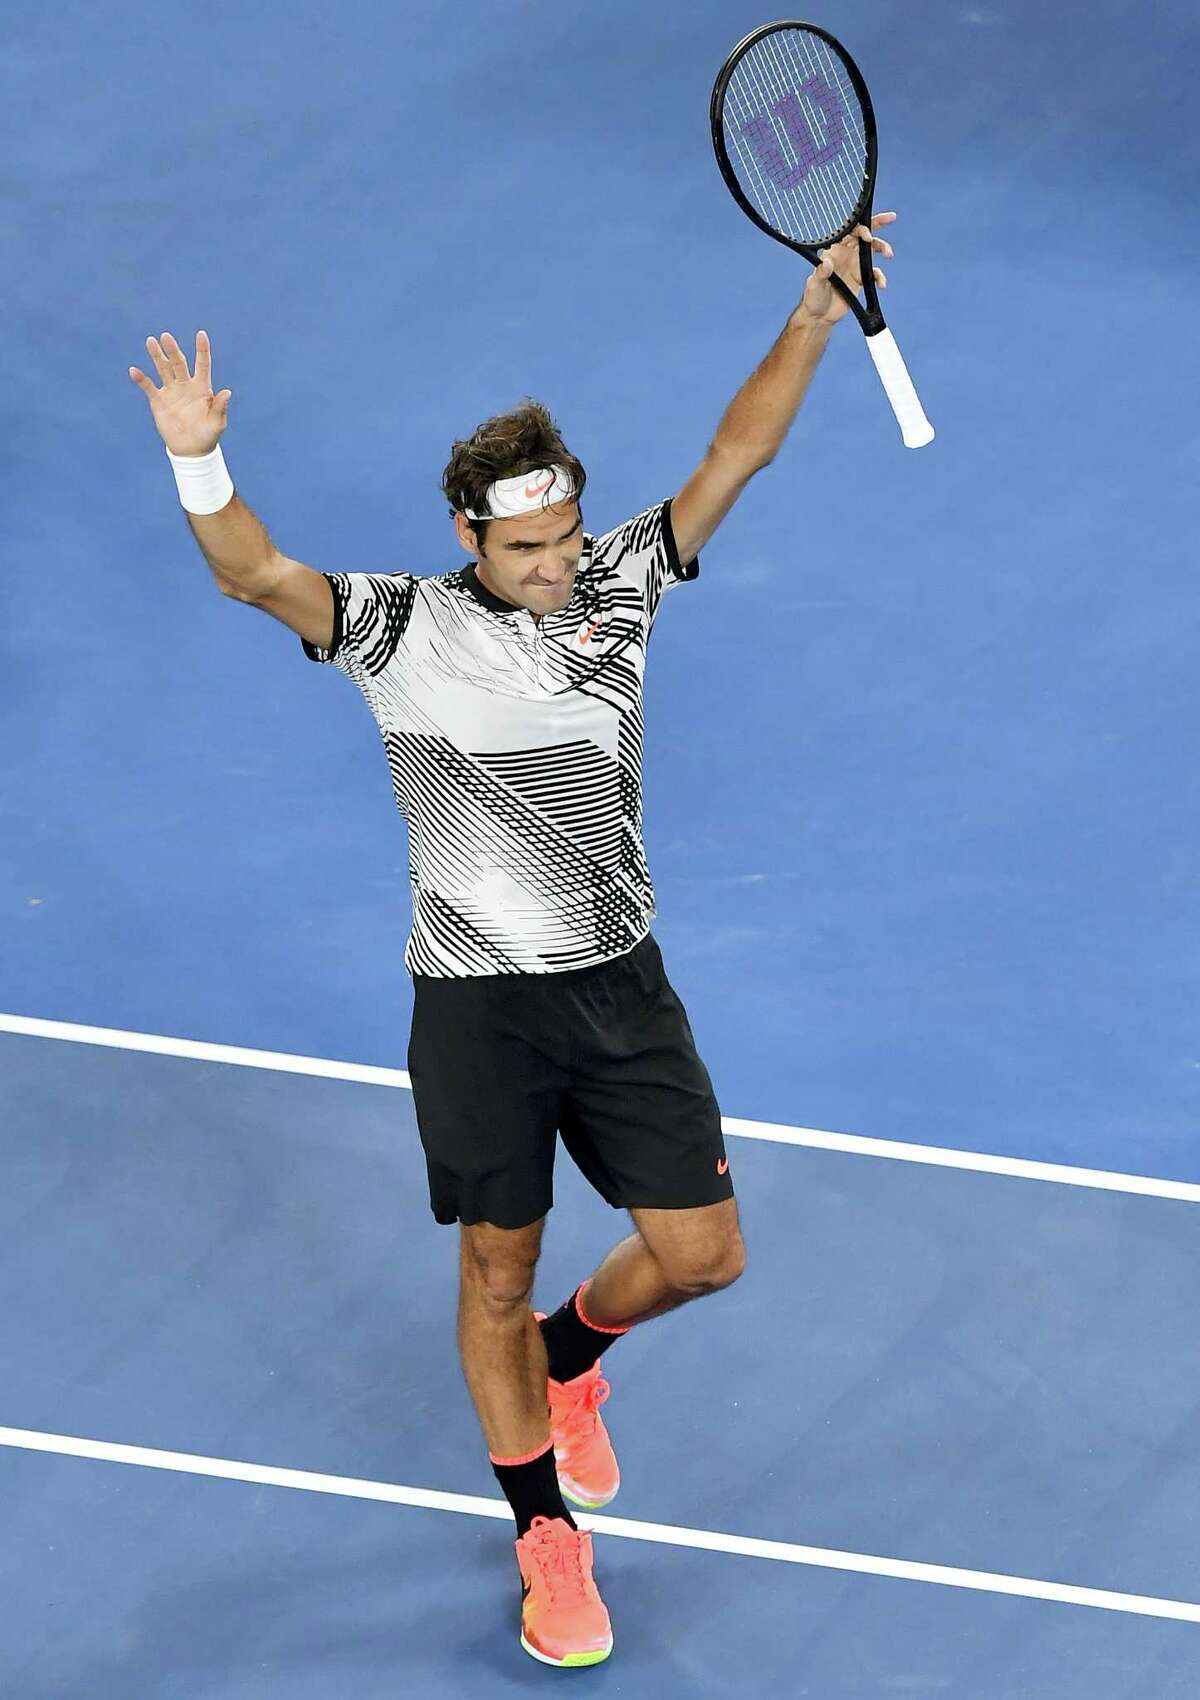 Switzerland’s Roger Federer celebrates after defeating compatriot Stan Wawrinka during their semifinal at the Australian Open tennis championships in Melbourne, Australia on Jan. 26, 2017.